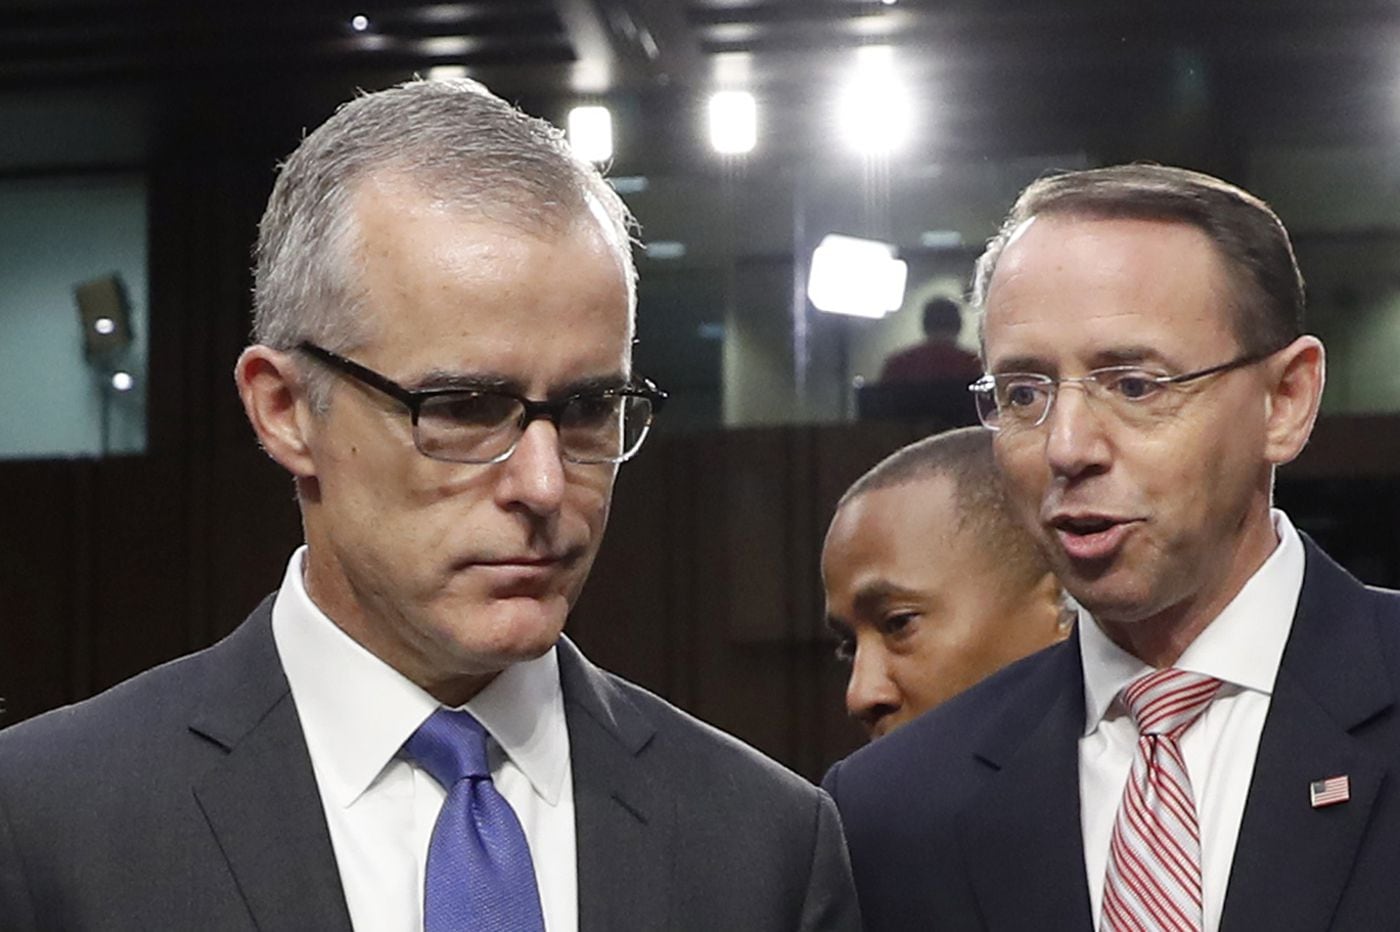 Image result for images of andrew mccabe